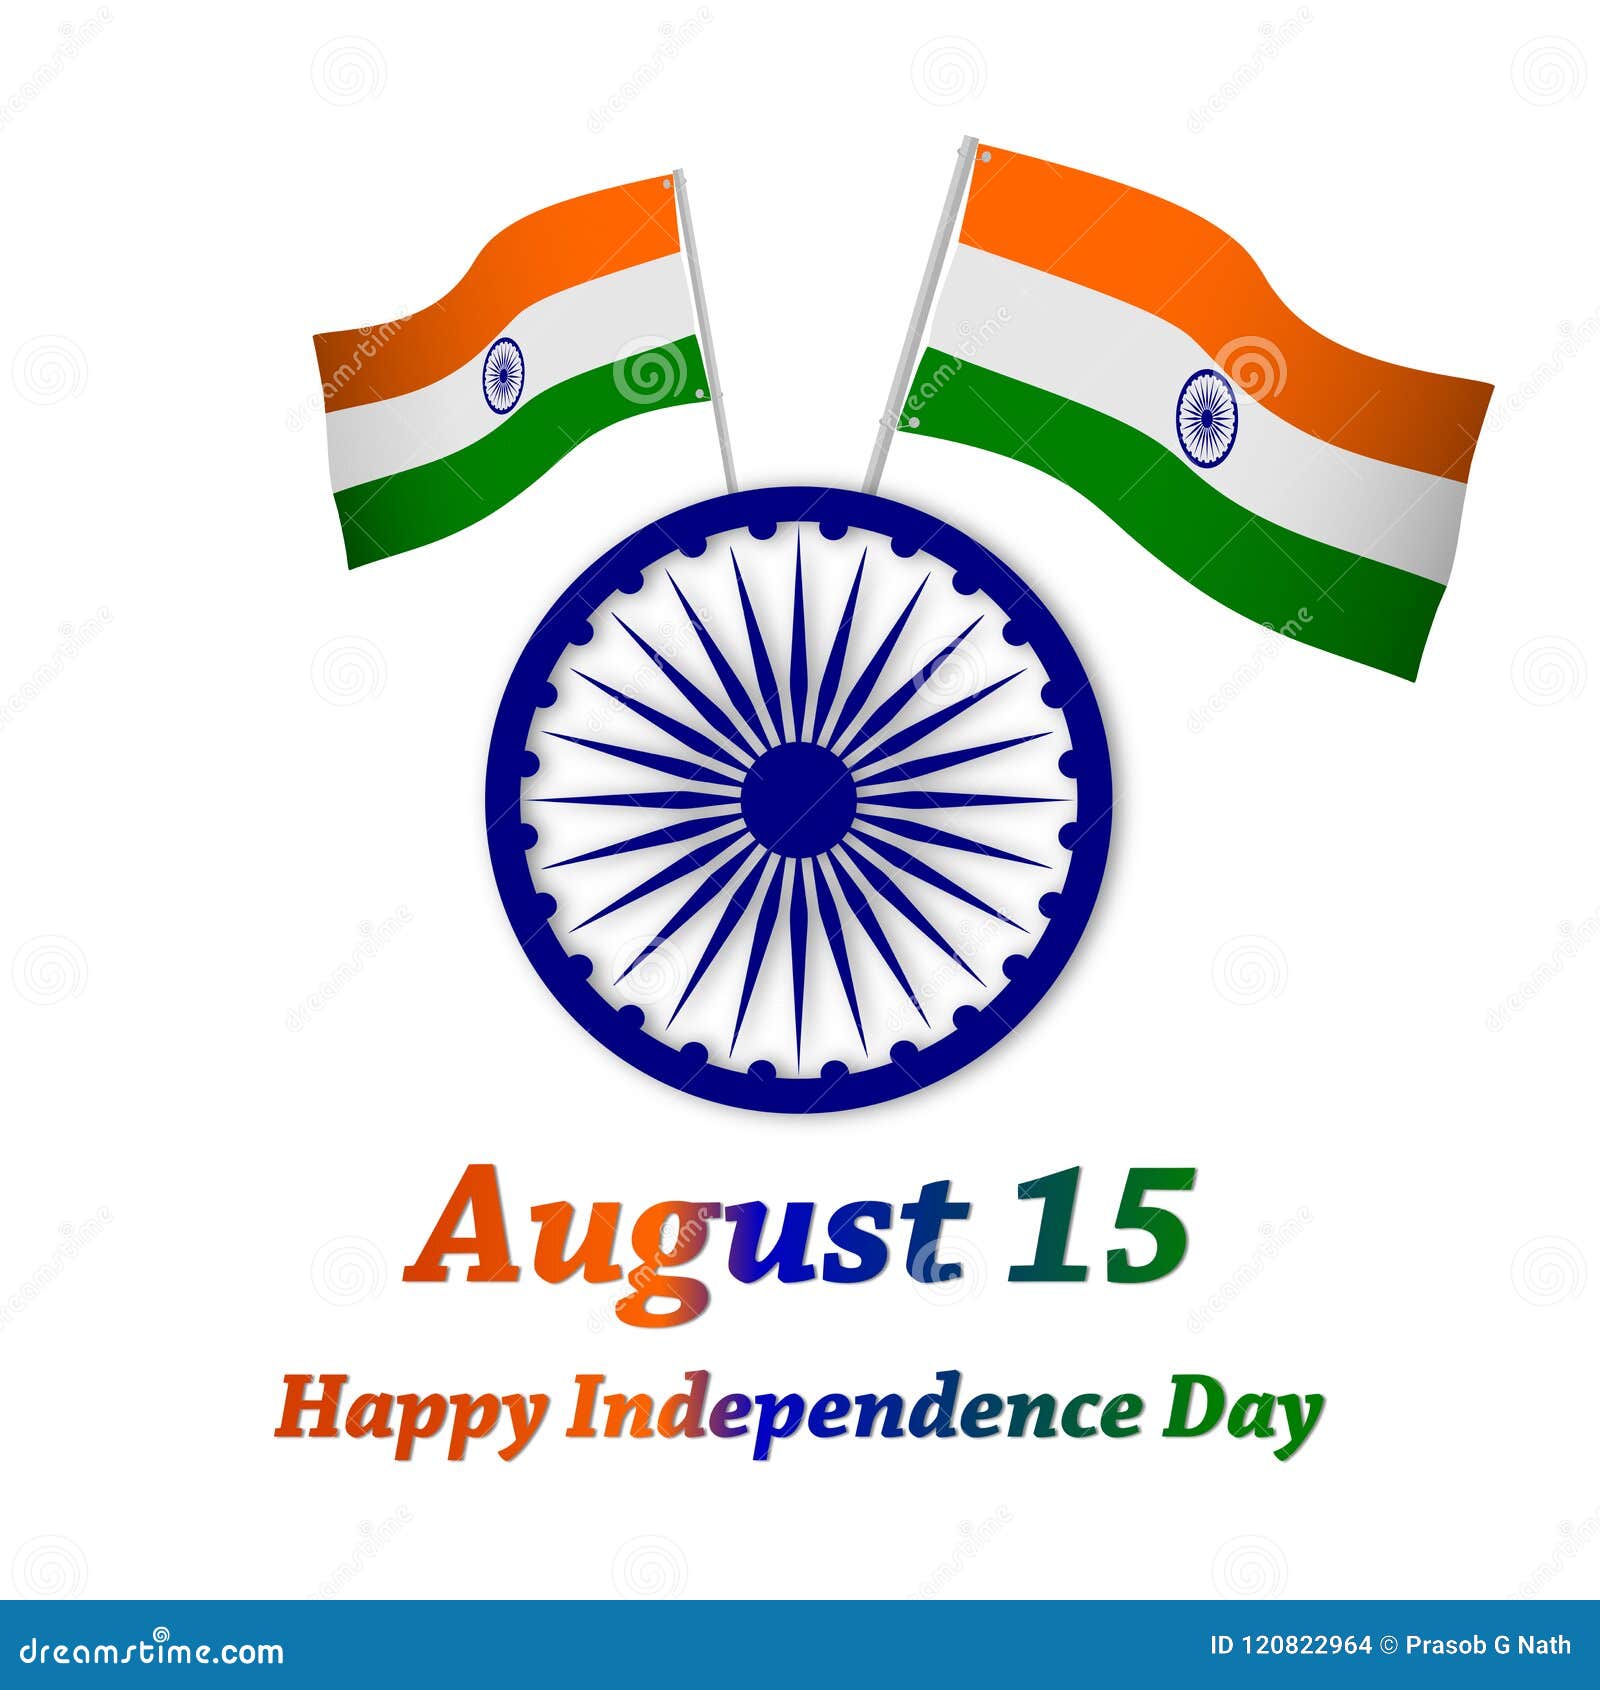 Happy Independence Day India. August 15.Greeting Card. Vectors ...